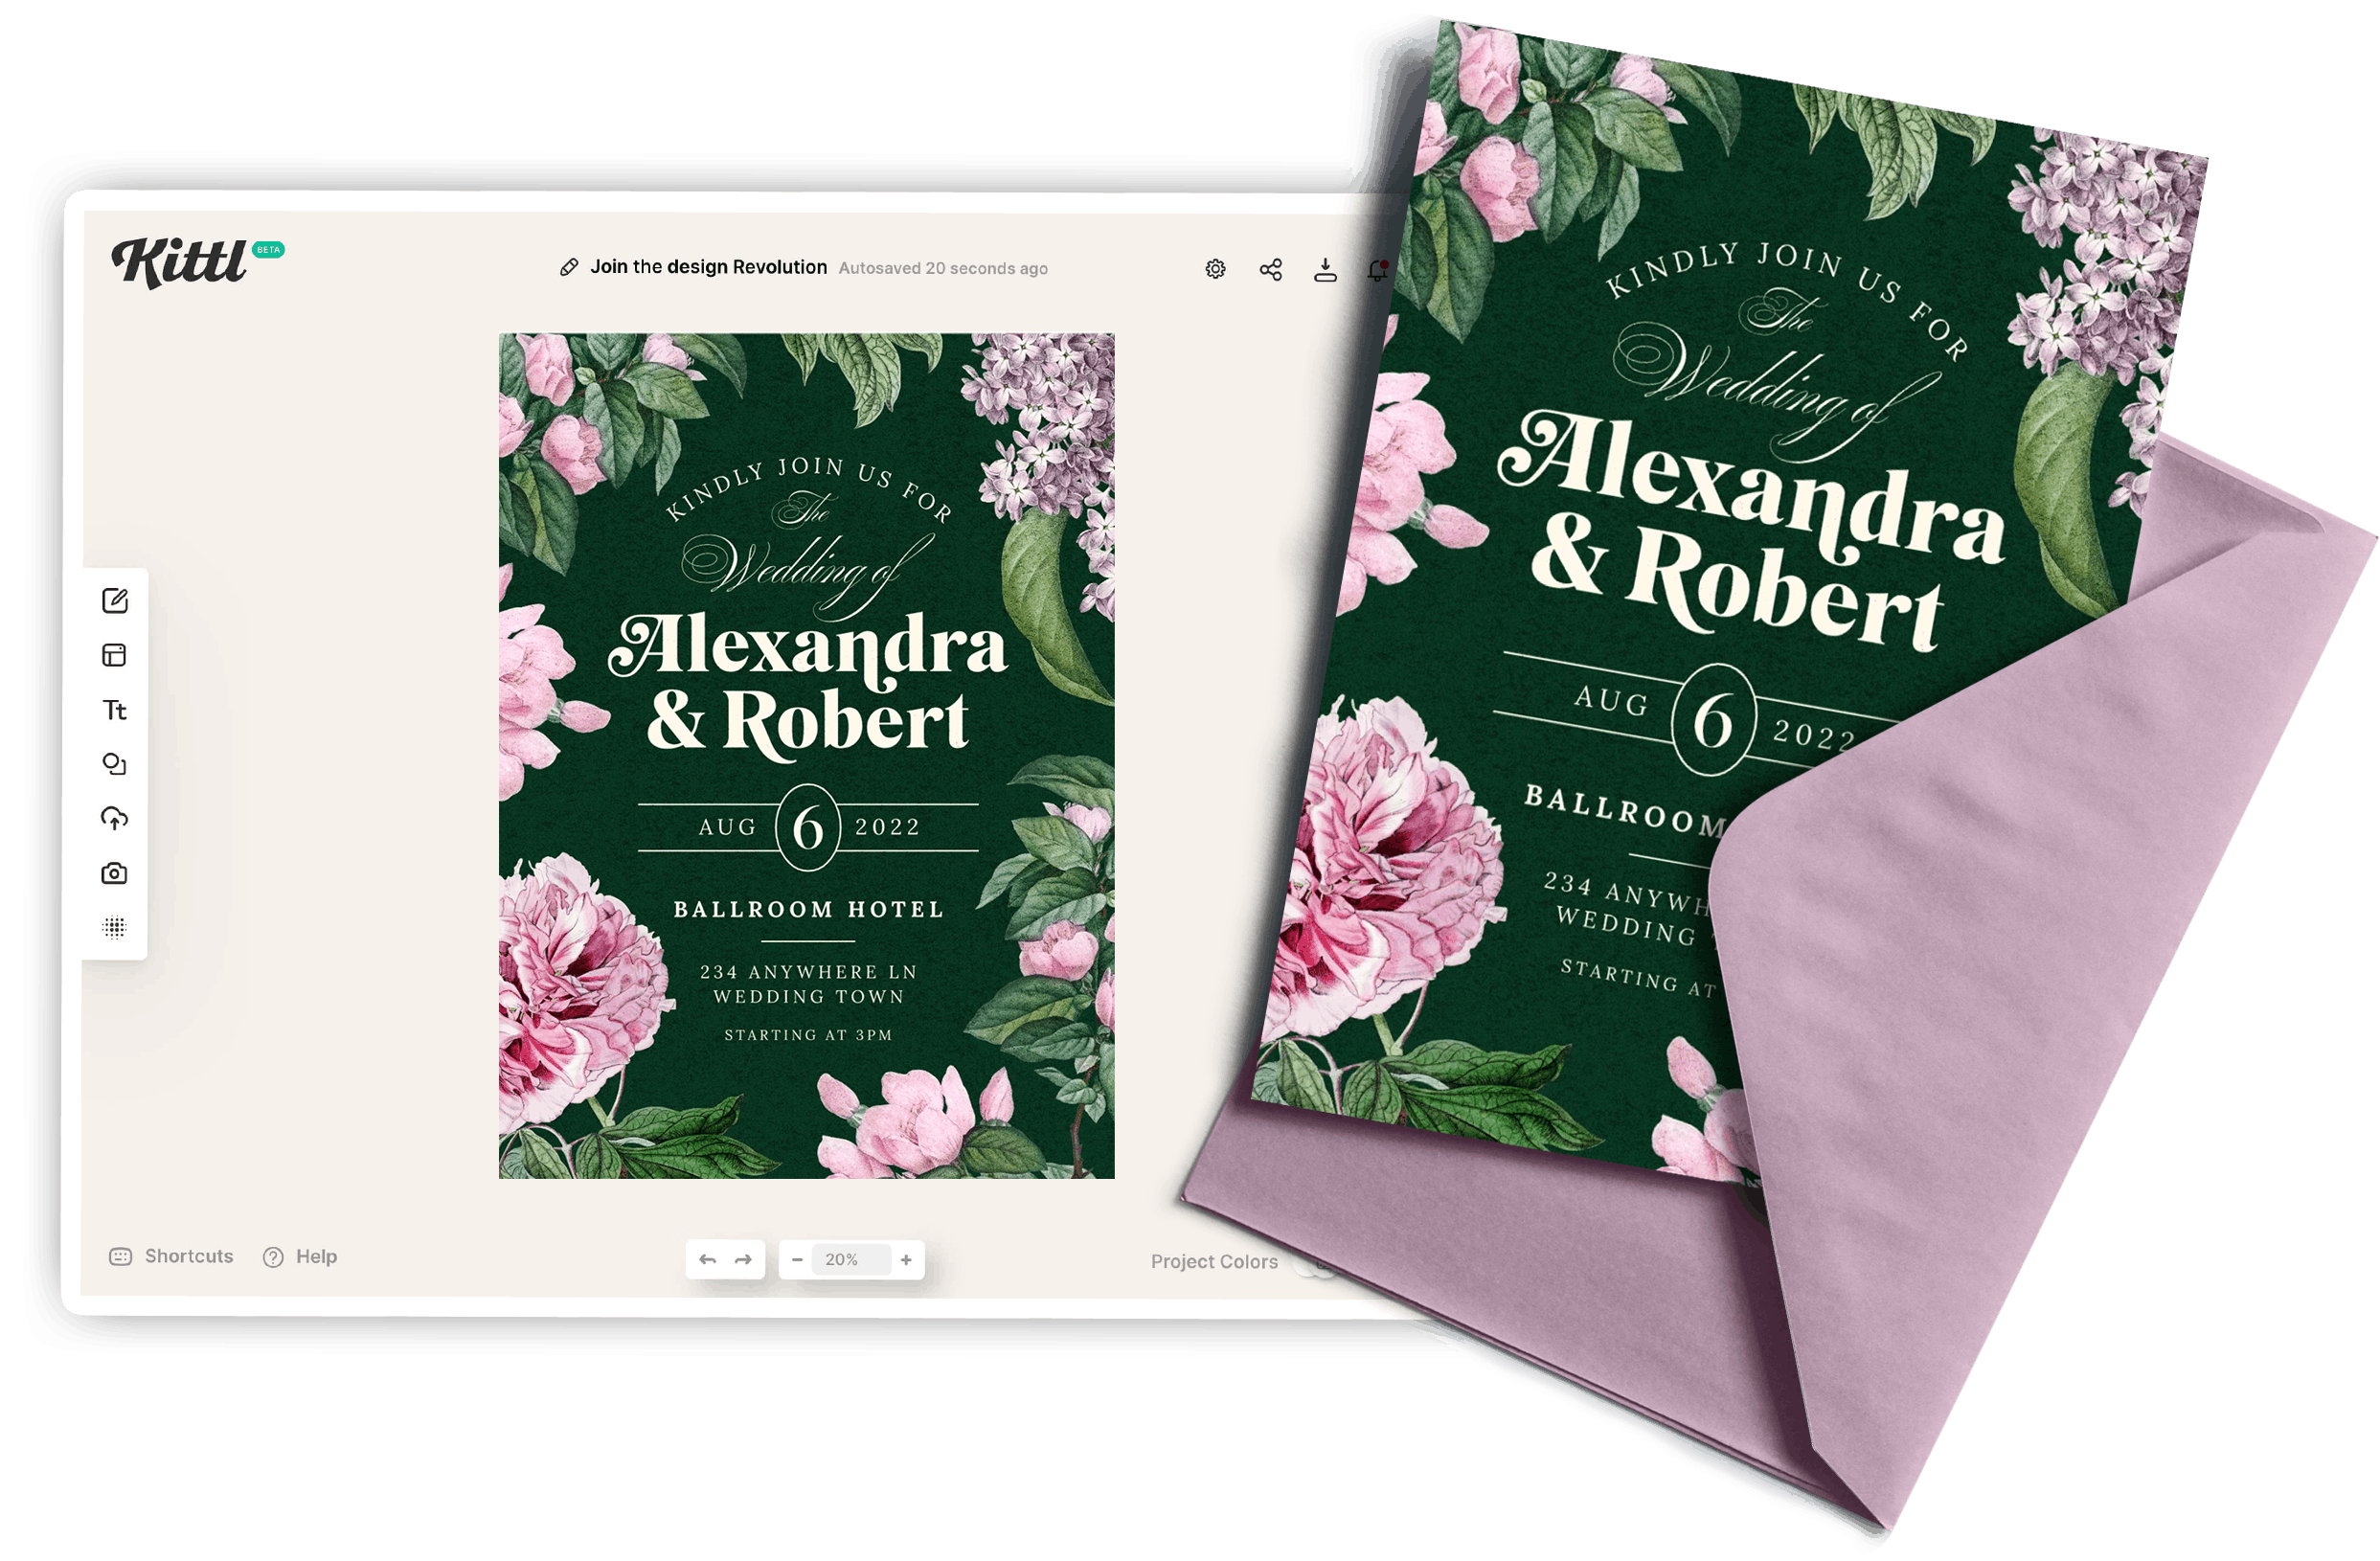 Image of Kittl's invitation maker design tool with a floral, green, purple and pink wedding invitation template being used. Next to it, the physical print version of the same wedding invitation is seen.